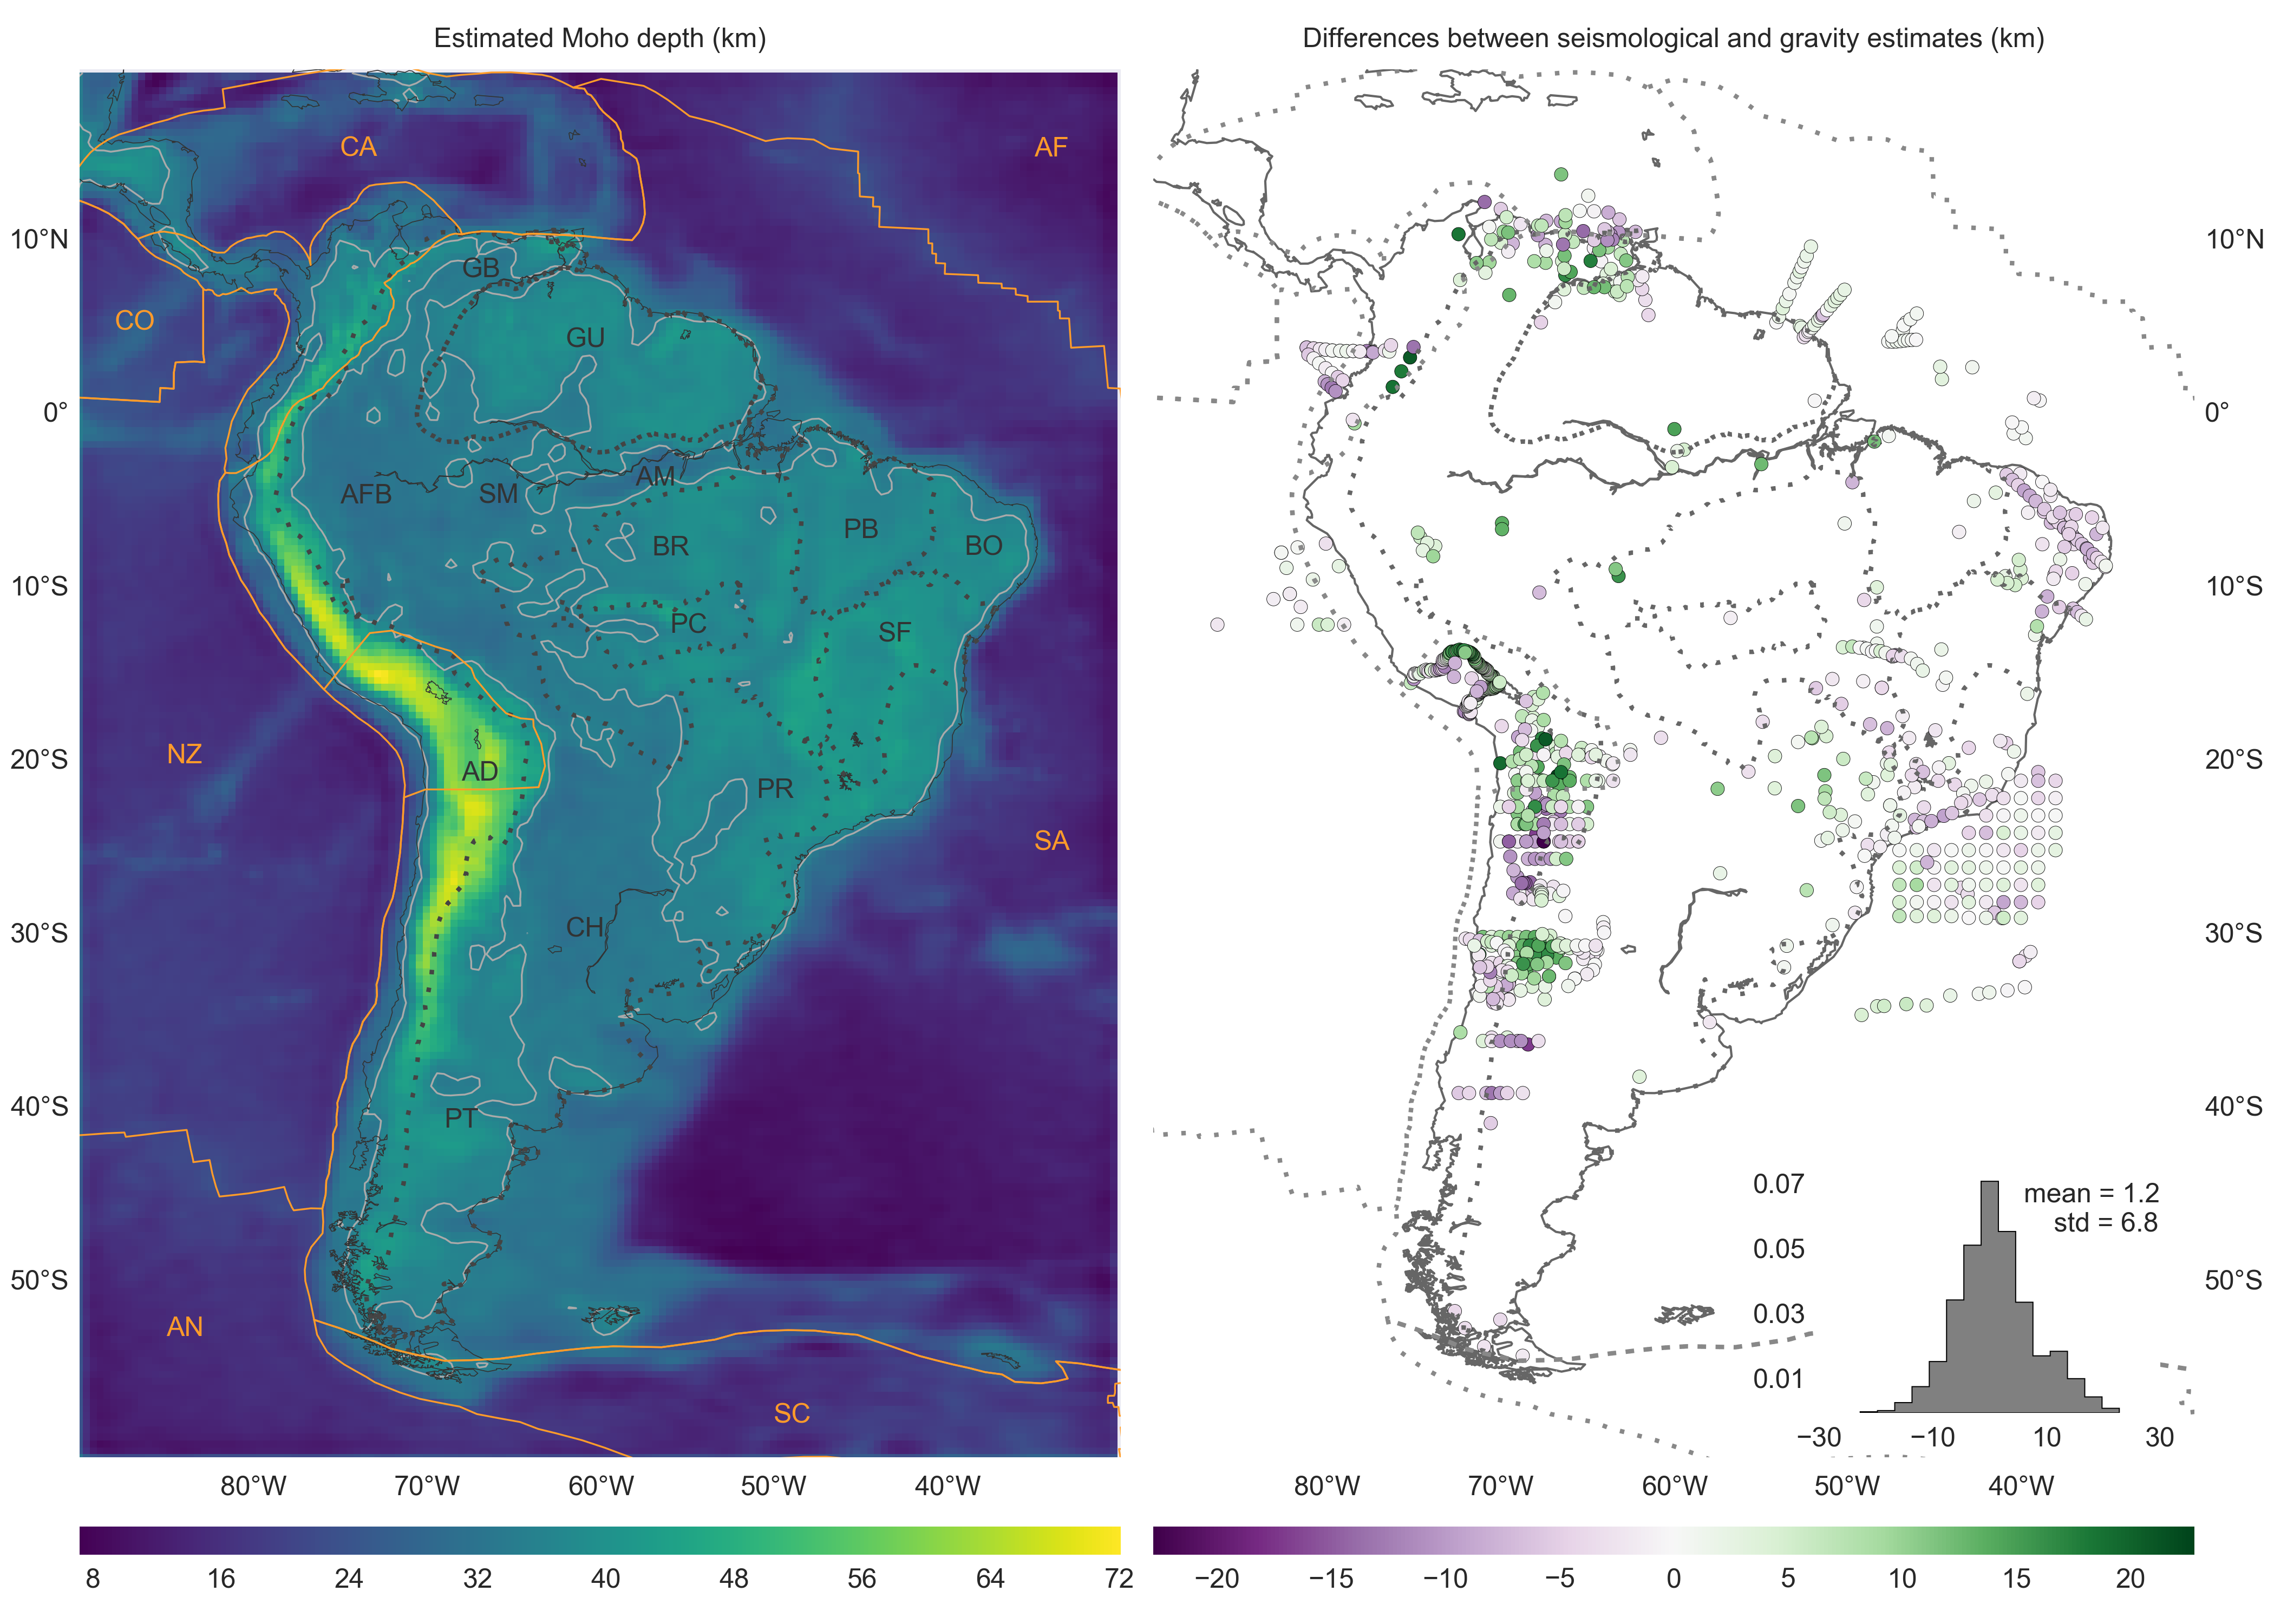 The estimated Moho depth for South America and differences with seismological estimates